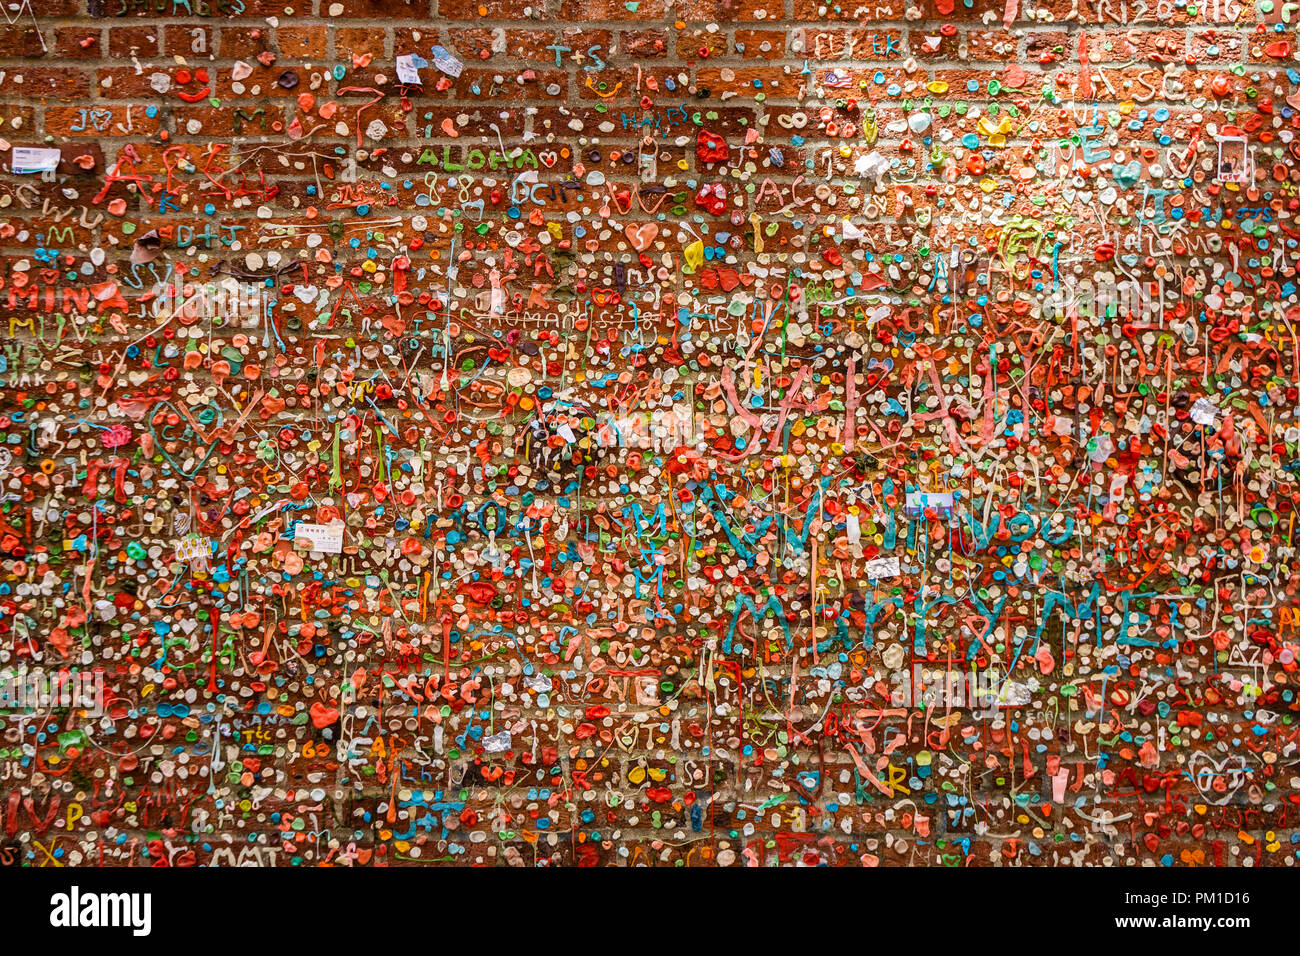 Gum Wall Market Theater in Post Alley, under Pike Place Market. Brick Wall covered with used chewing gums, downtown Seattle, WA, USA. Stock Photo